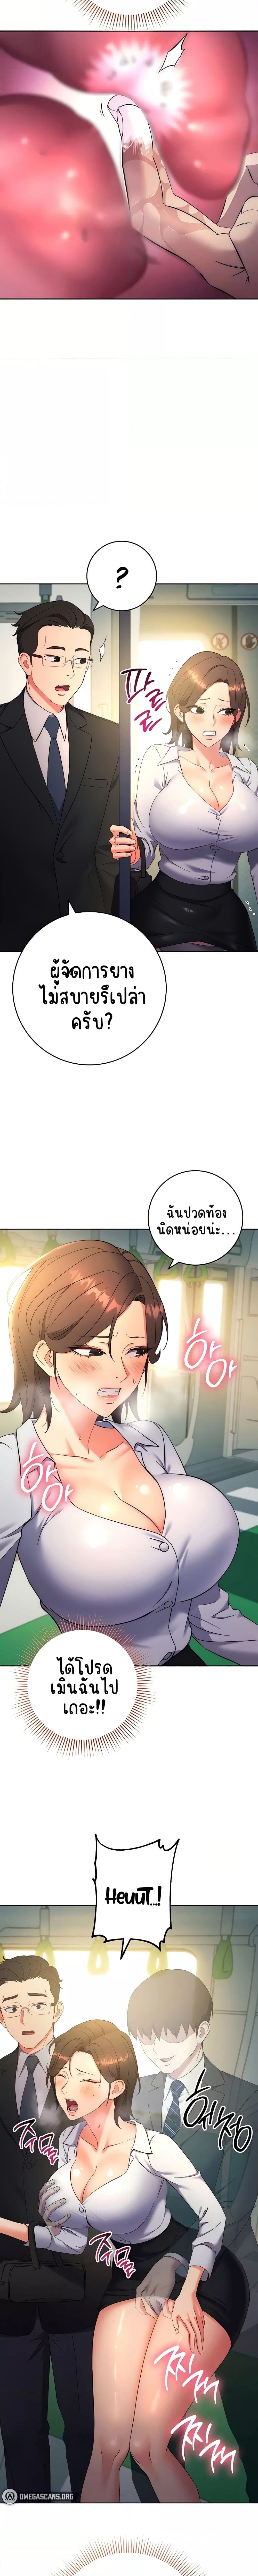 Outsider: The Invisible Man ตอนที่ 9 ภาพ 17